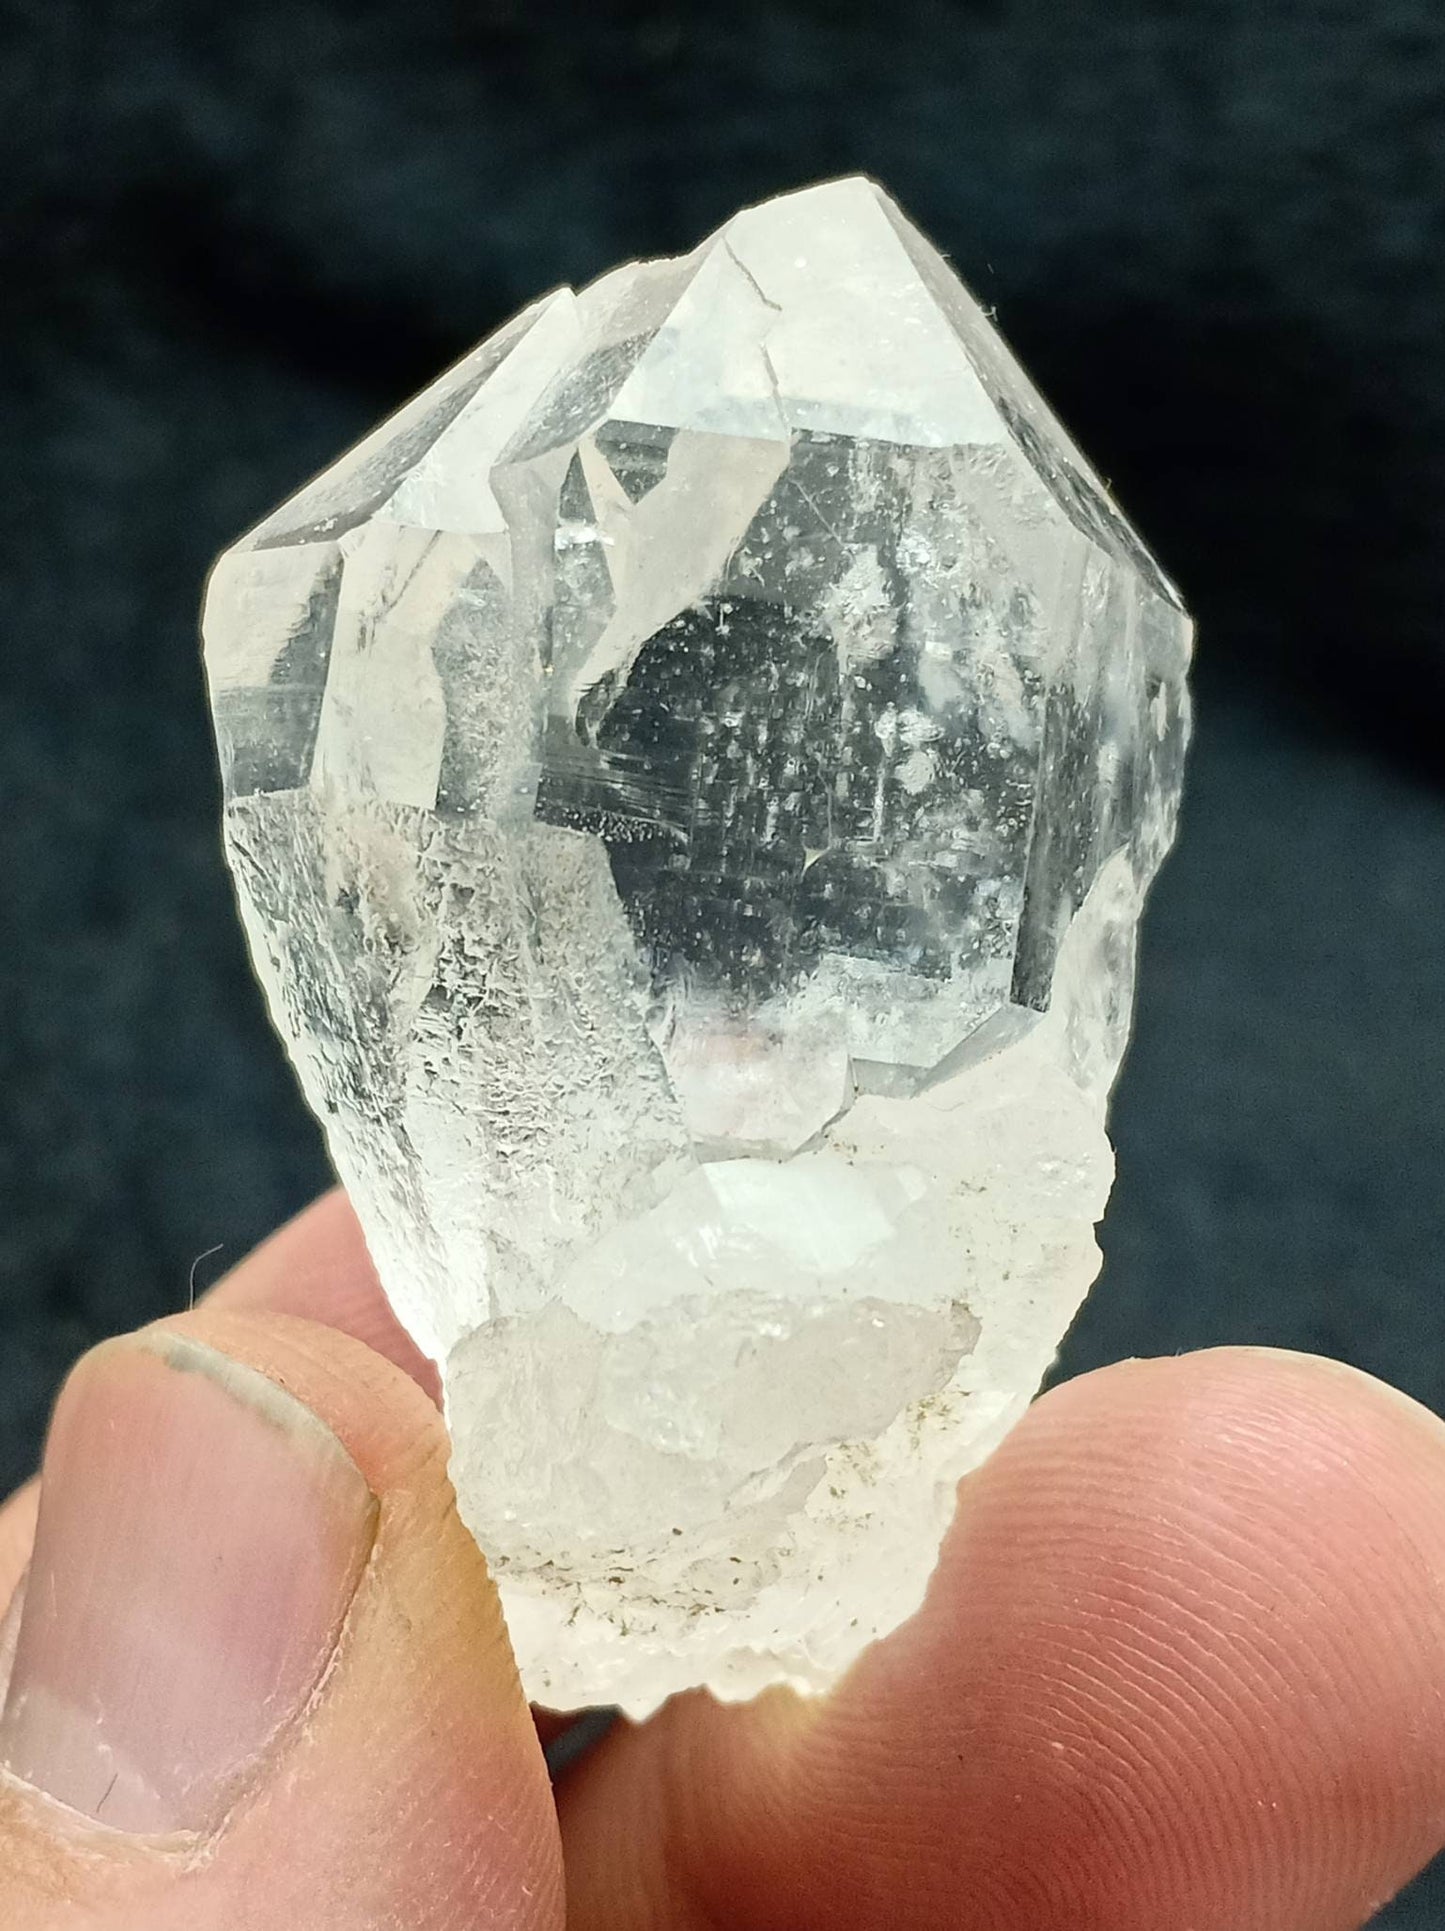 An amazing specimen of twin terminated clear Quartz Crystals 44 grams